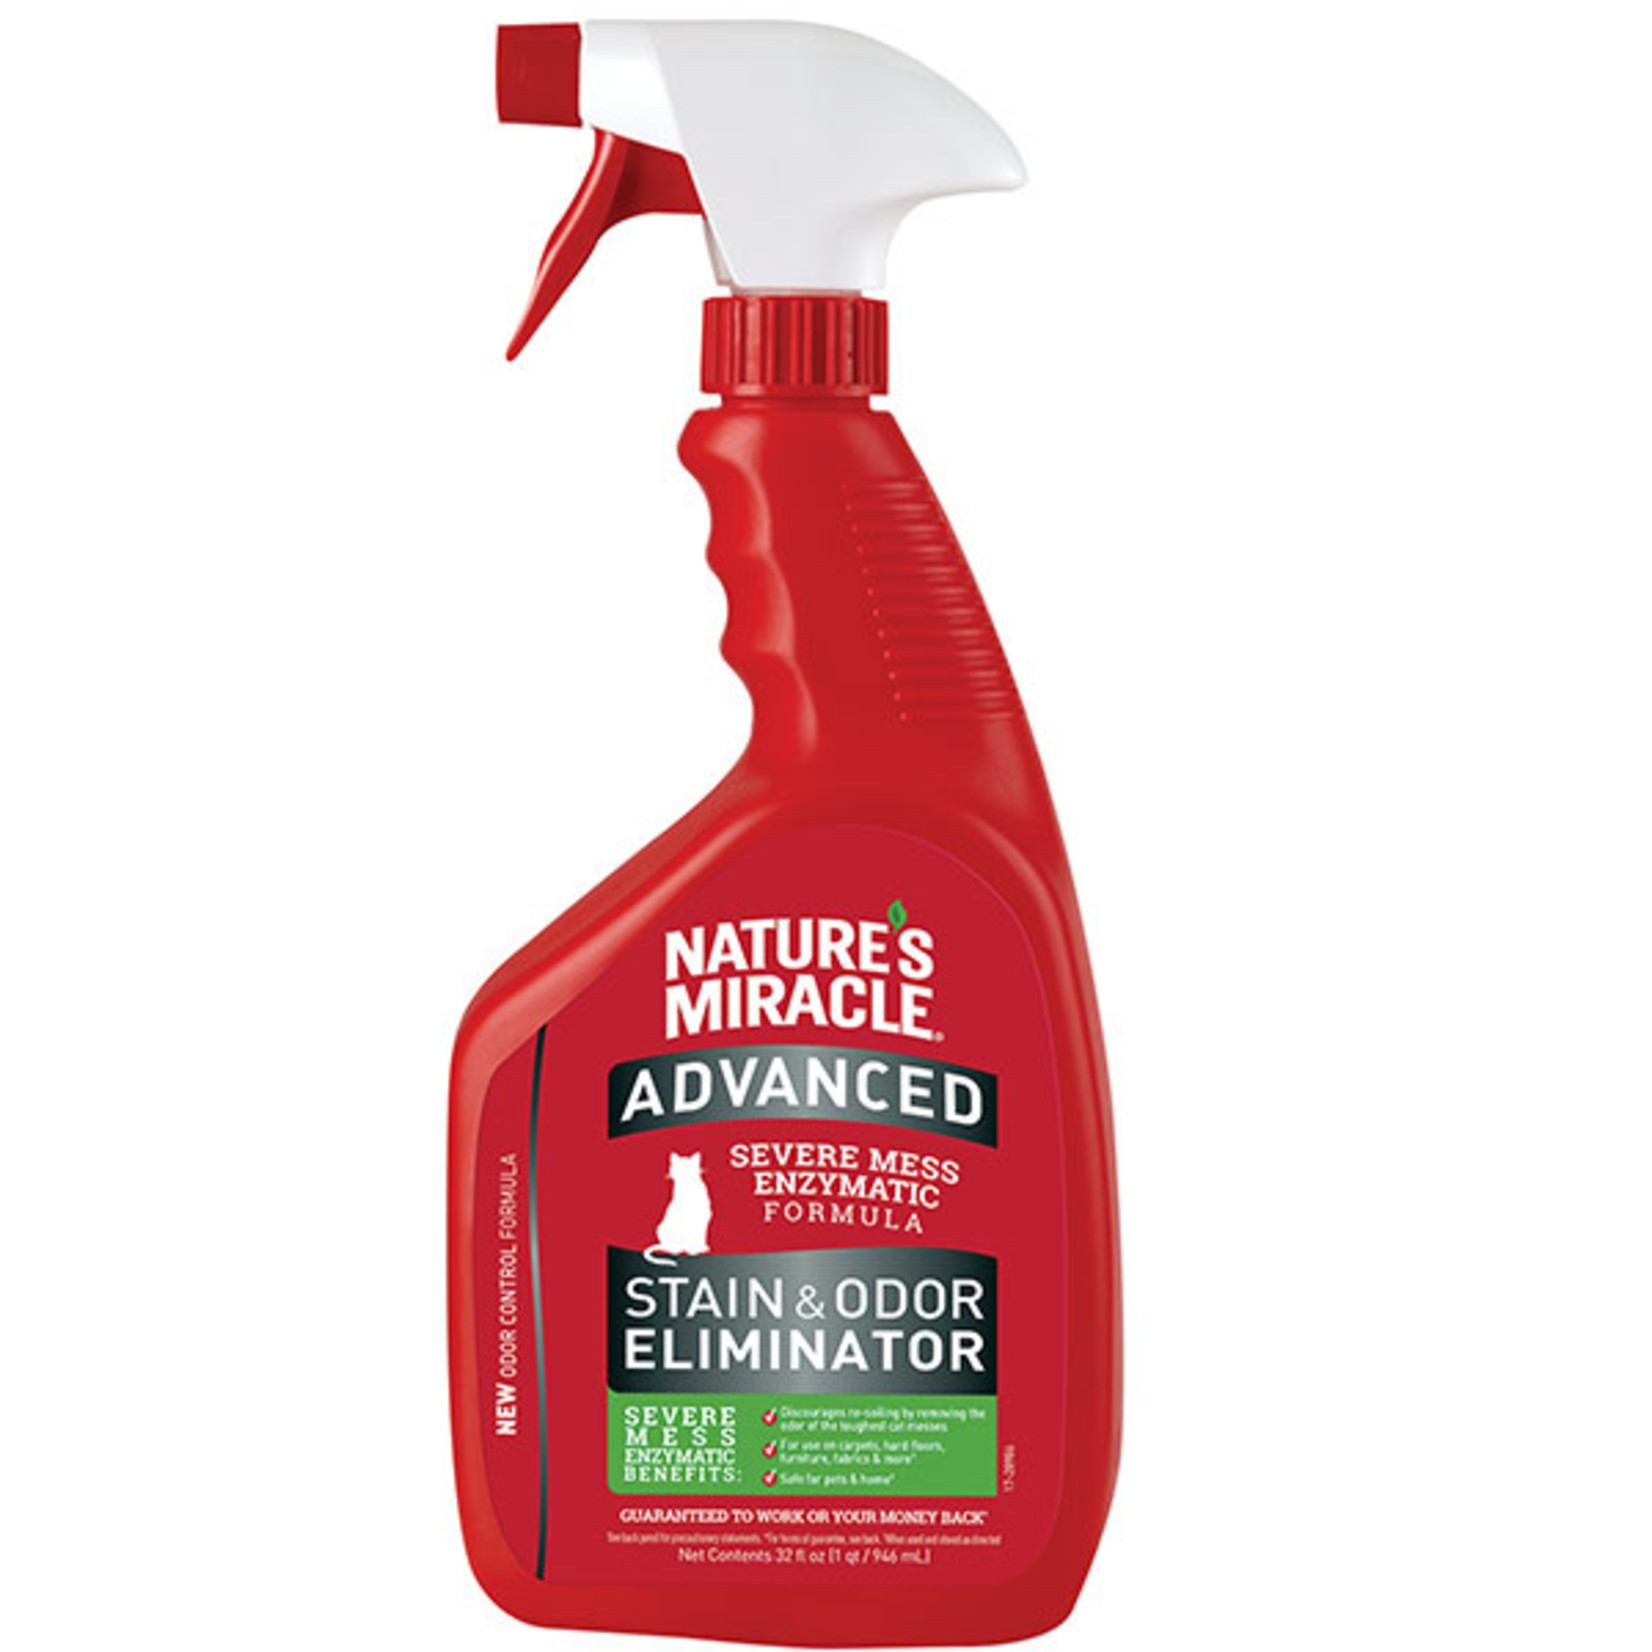 Natures Miracle Nature's Miracle Advanced Cat Stain & Odor Eliminator Severe Mess Enzymatic Formula 32oz Spray Bottle